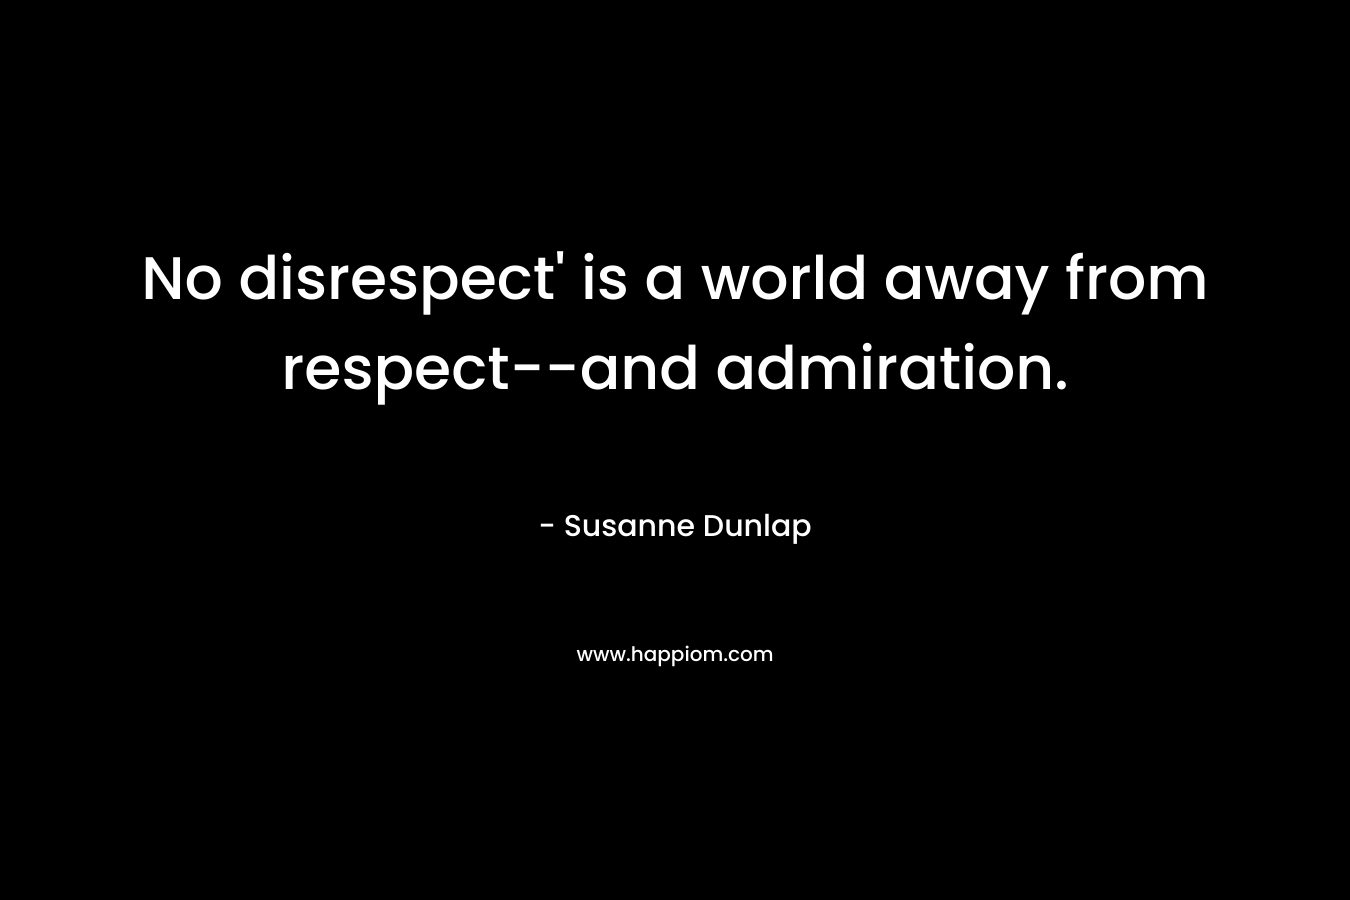 No disrespect' is a world away from respect--and admiration.